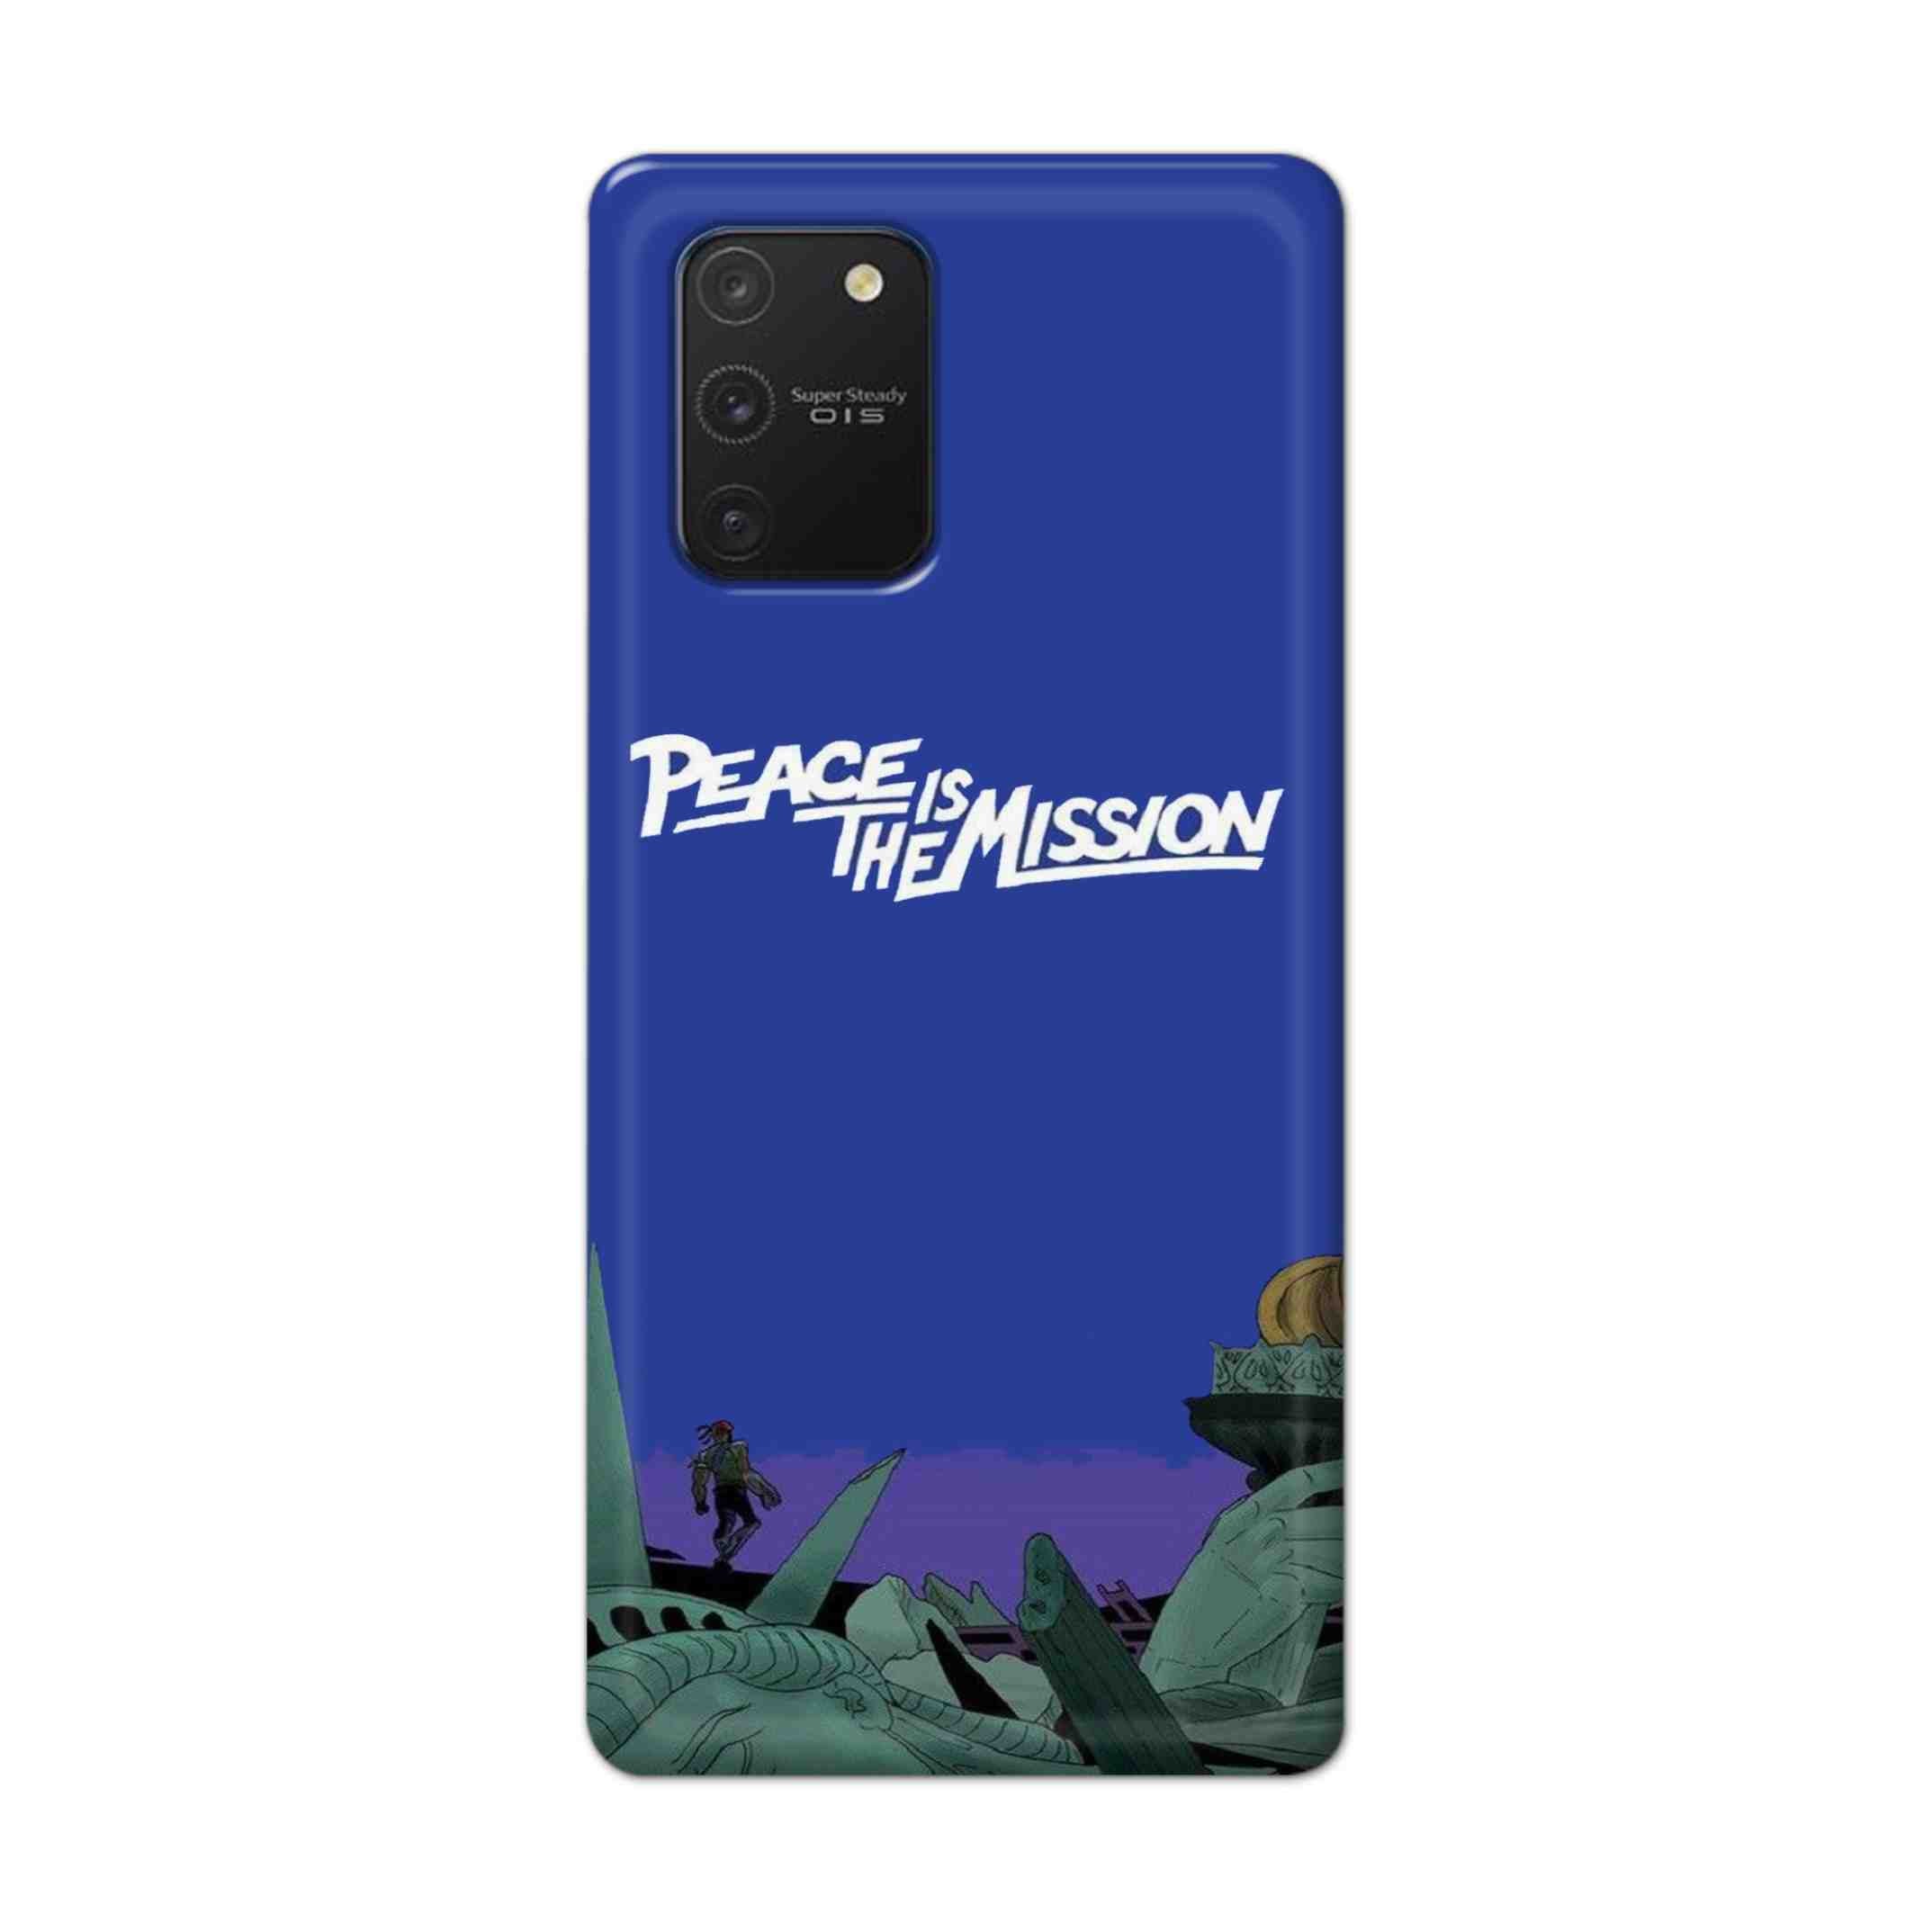 Buy Peace Is The Misson Hard Back Mobile Phone Case Cover For Samsung Galaxy Note 10 Lite (NEW) Online